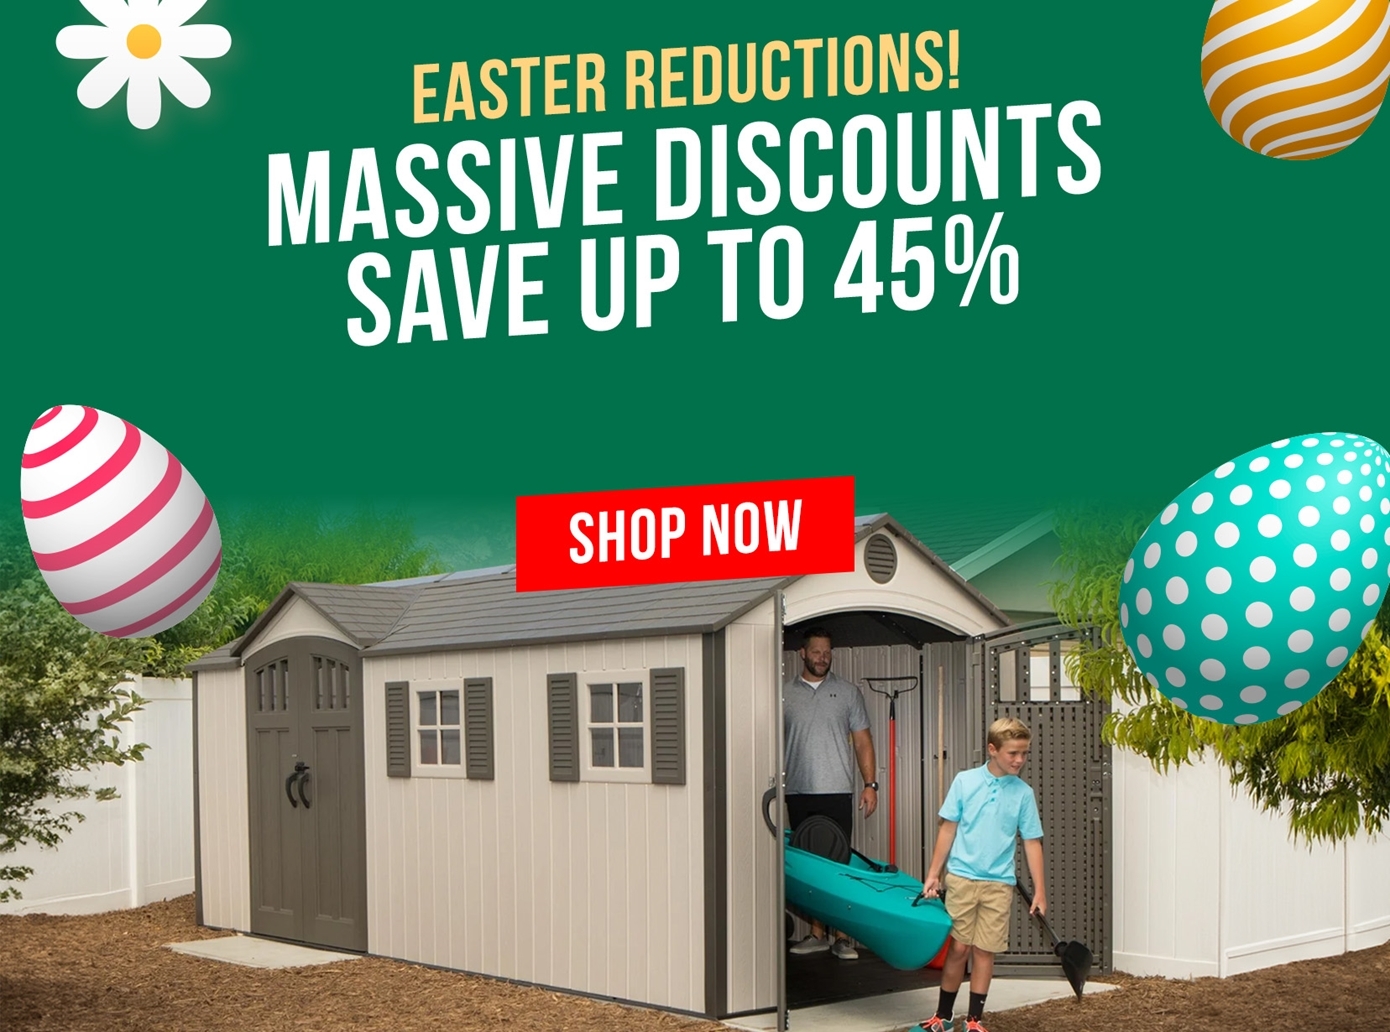 easter reductions save up to 45% 